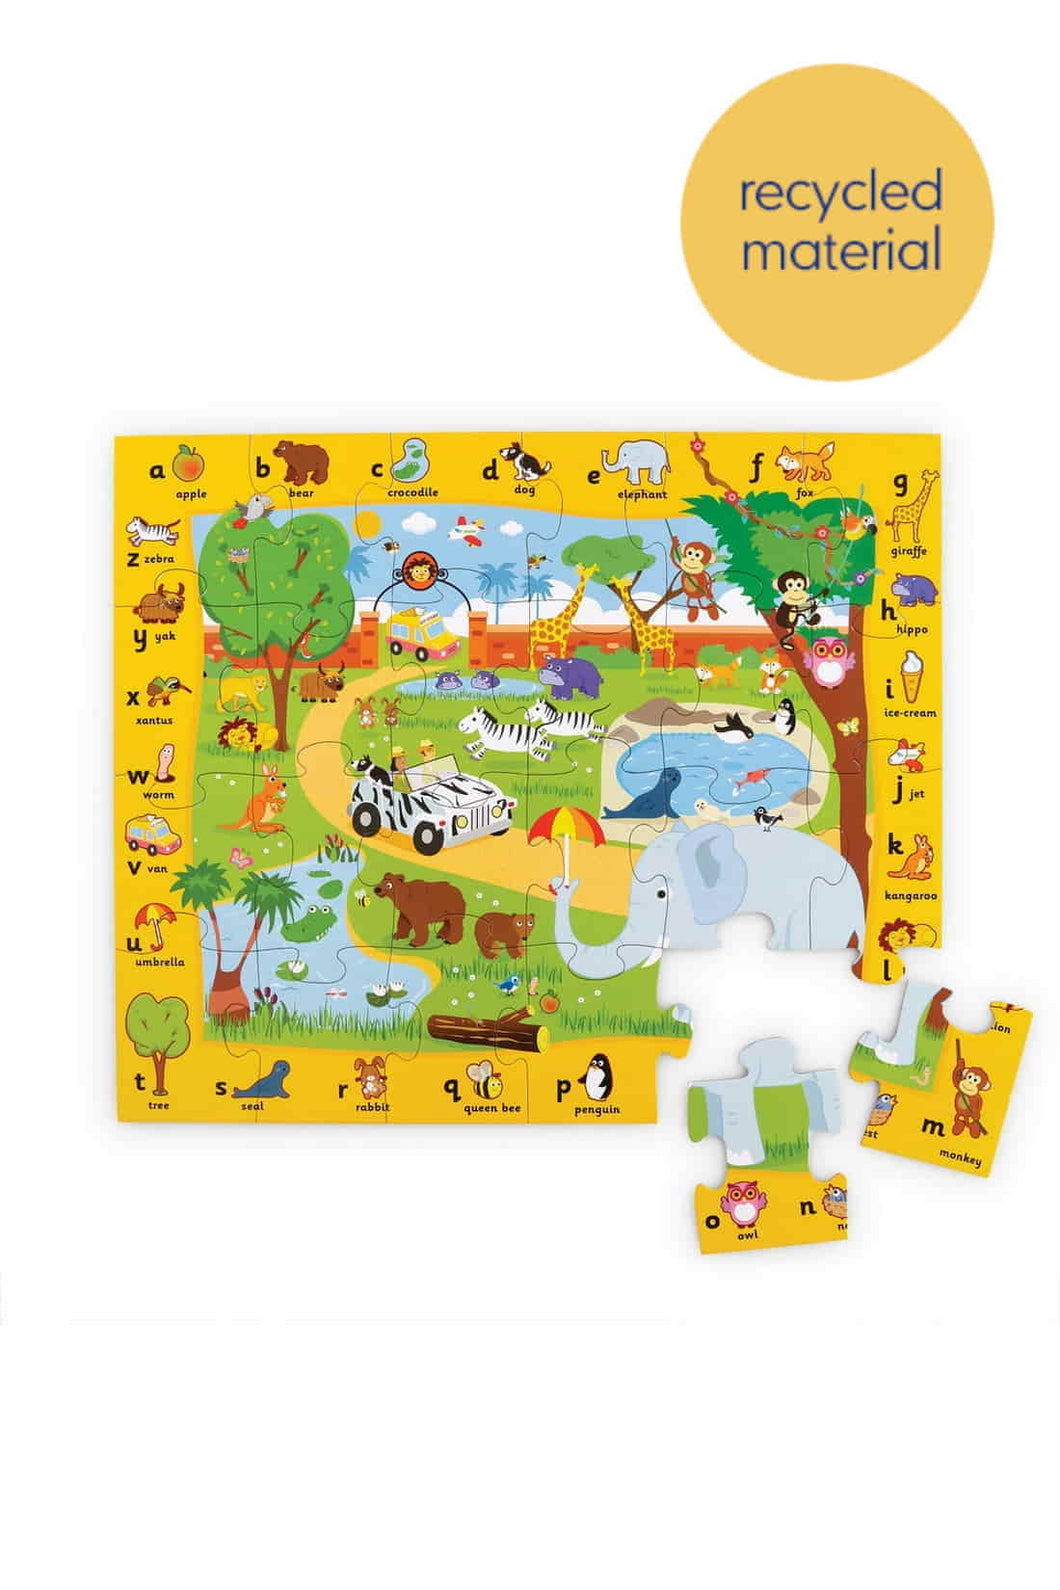 Early Learning Centre Look & Find Safari Park 24 Piece Floor Jigsaw Puzzle